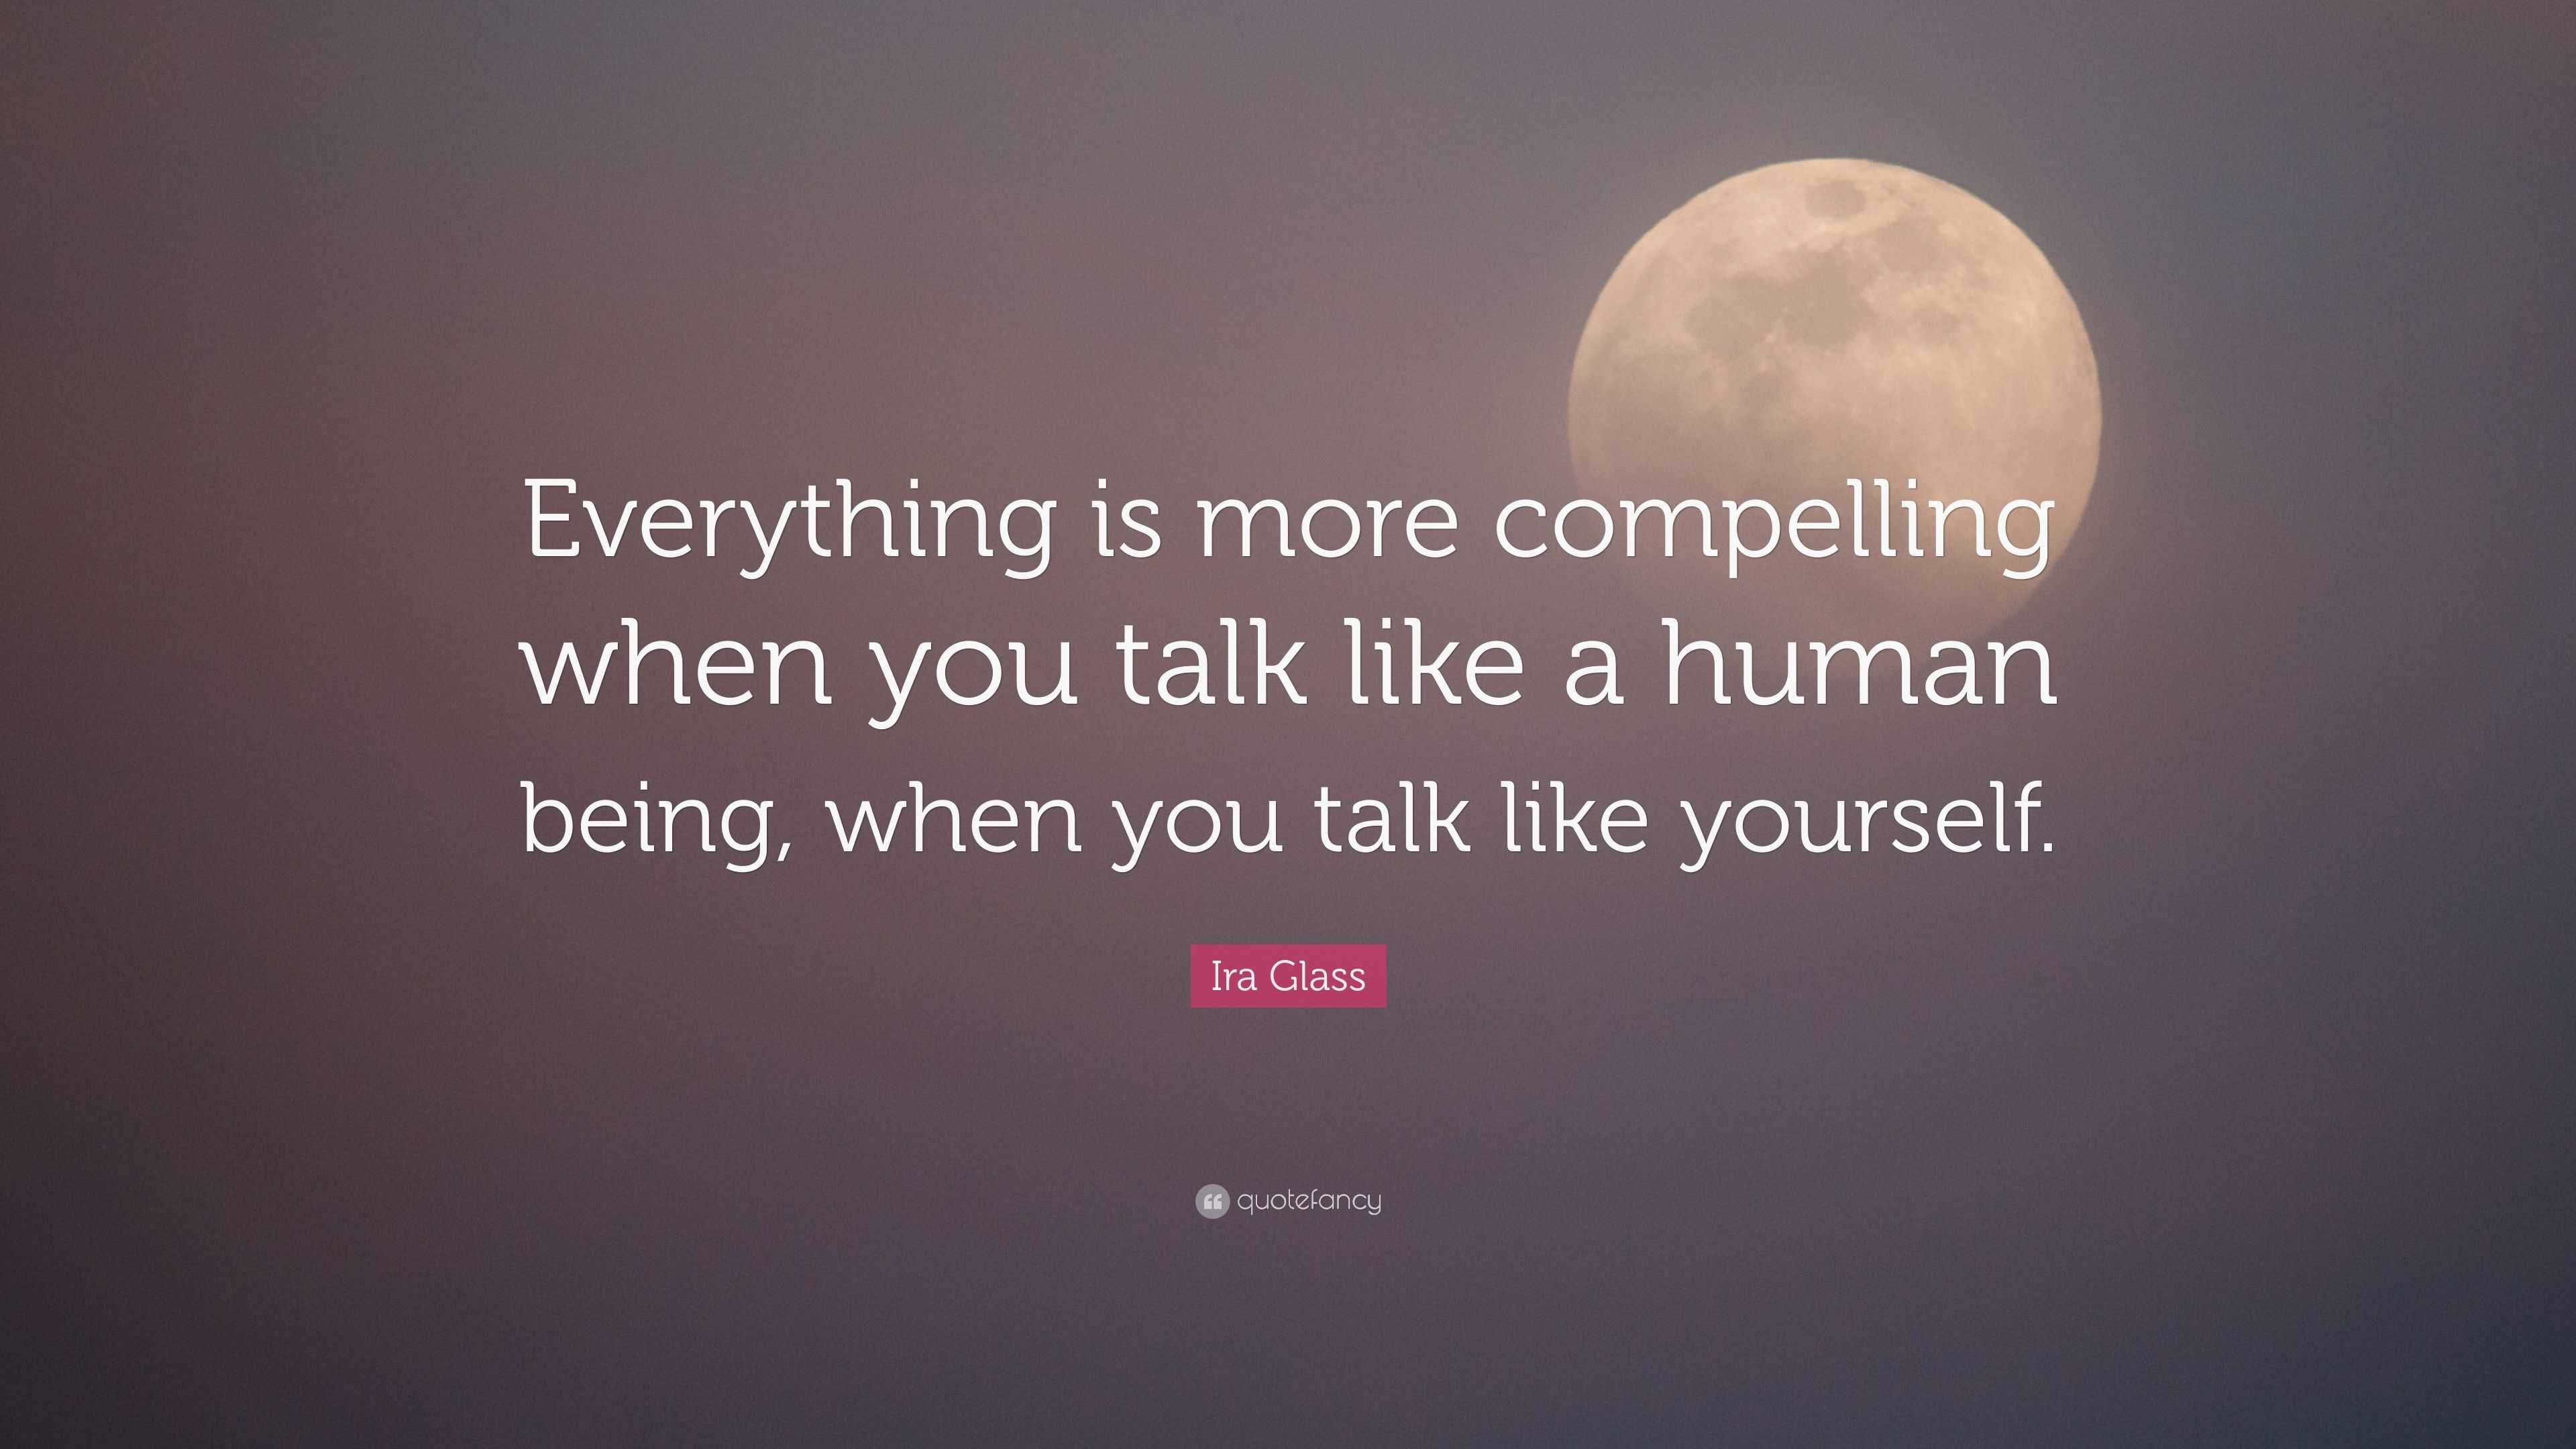 Ira Glass Quote: “Everything is more compelling when you talk like a ...